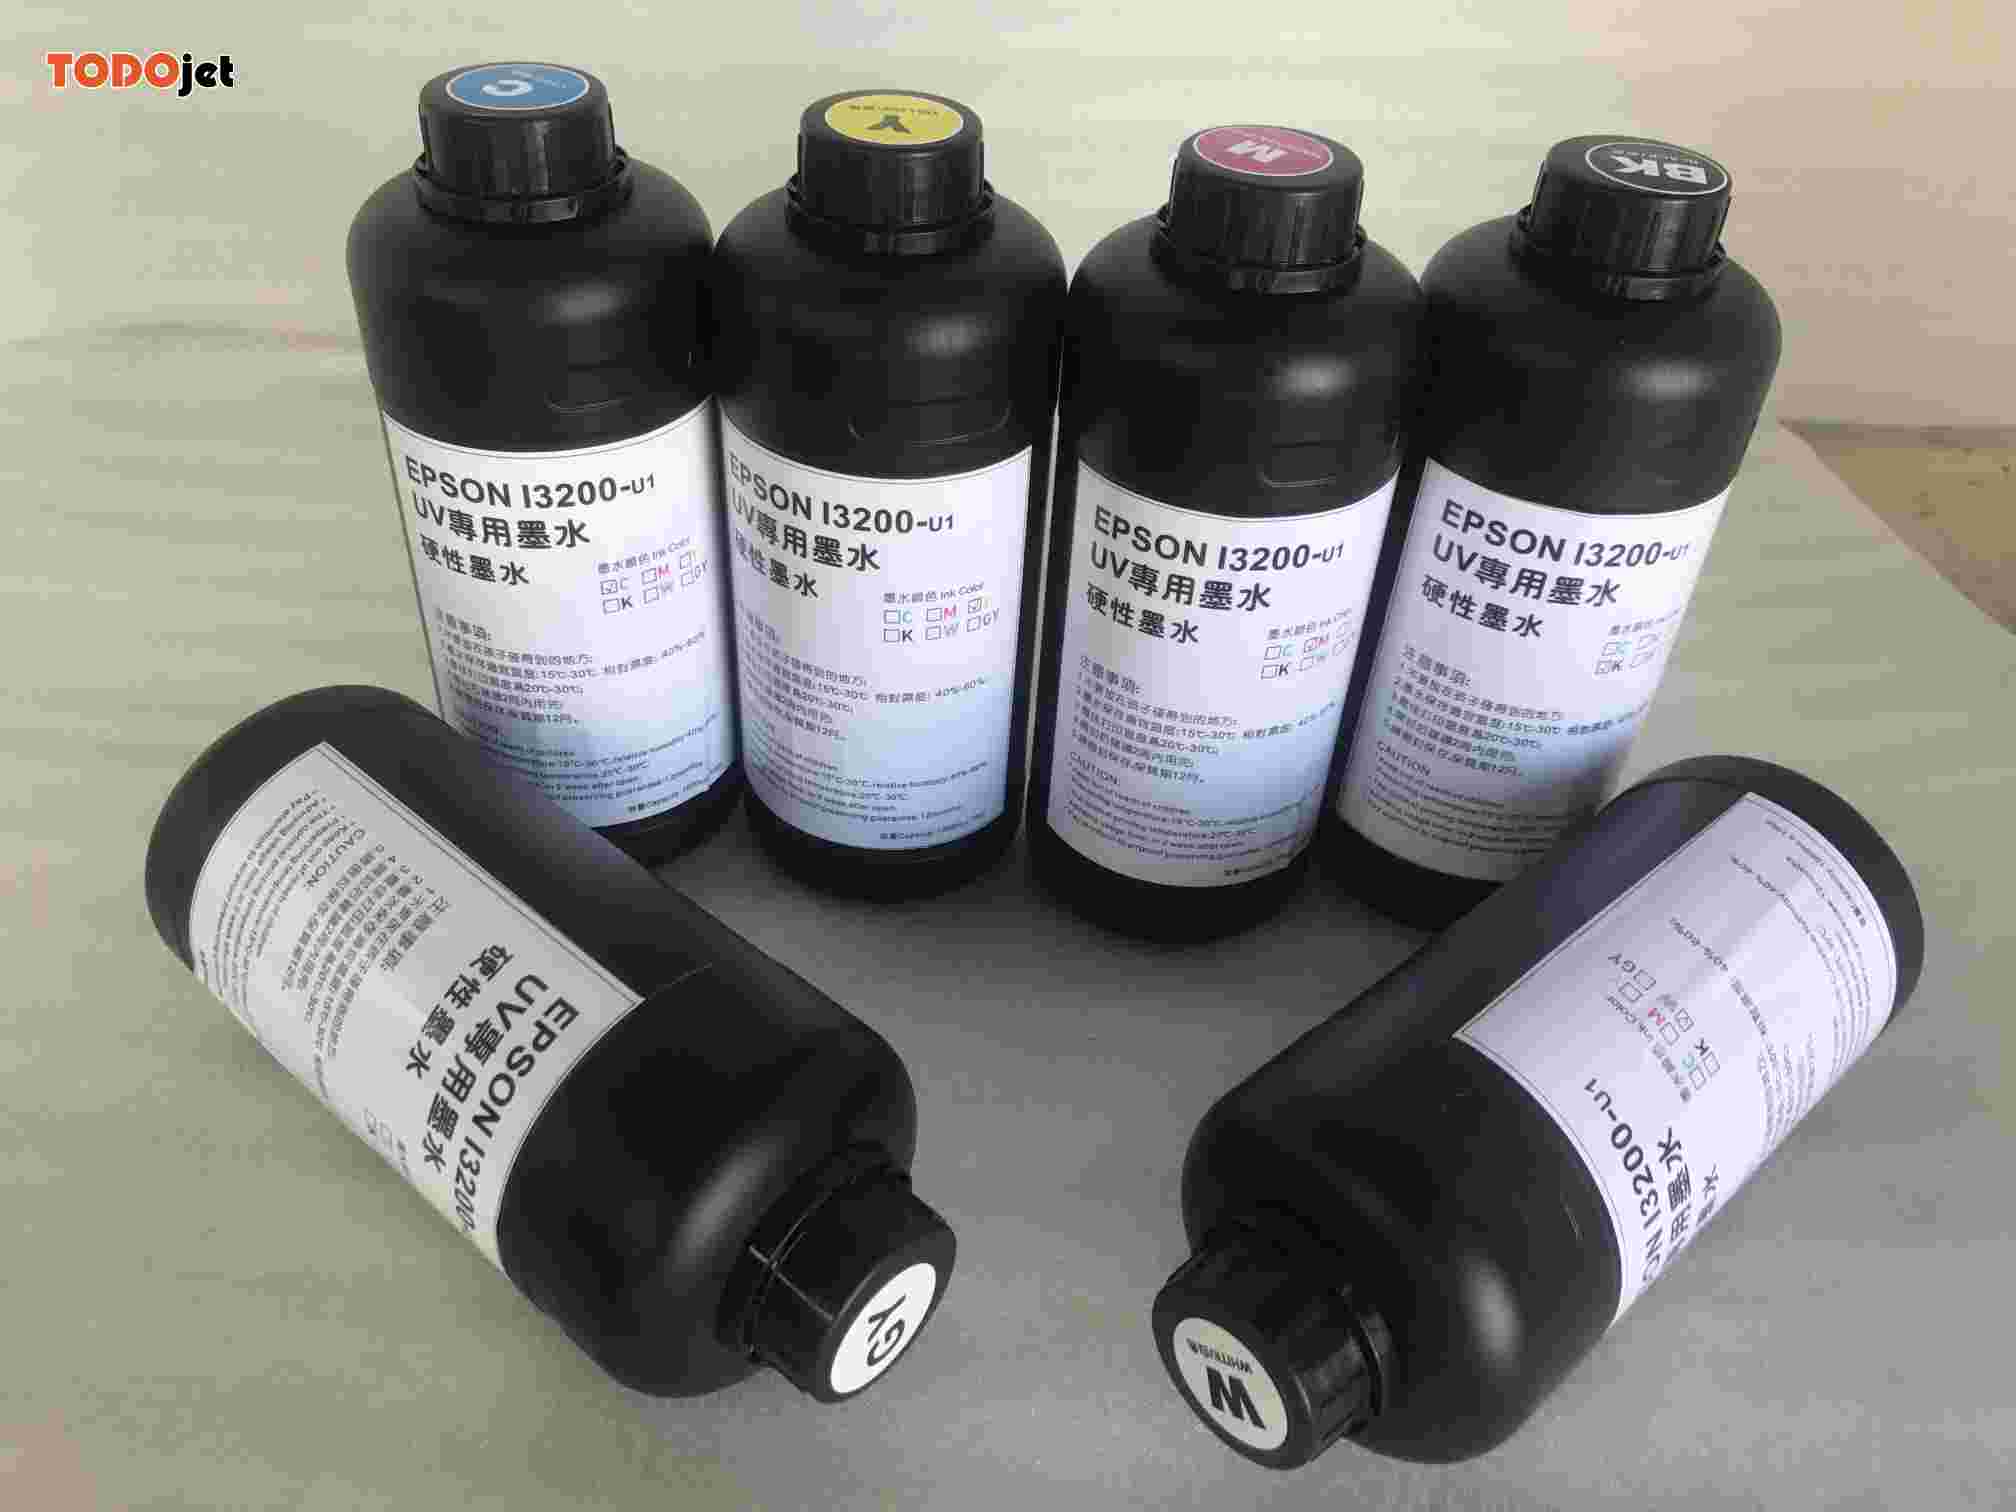 How do UV printer users choose more suitable UV inks?